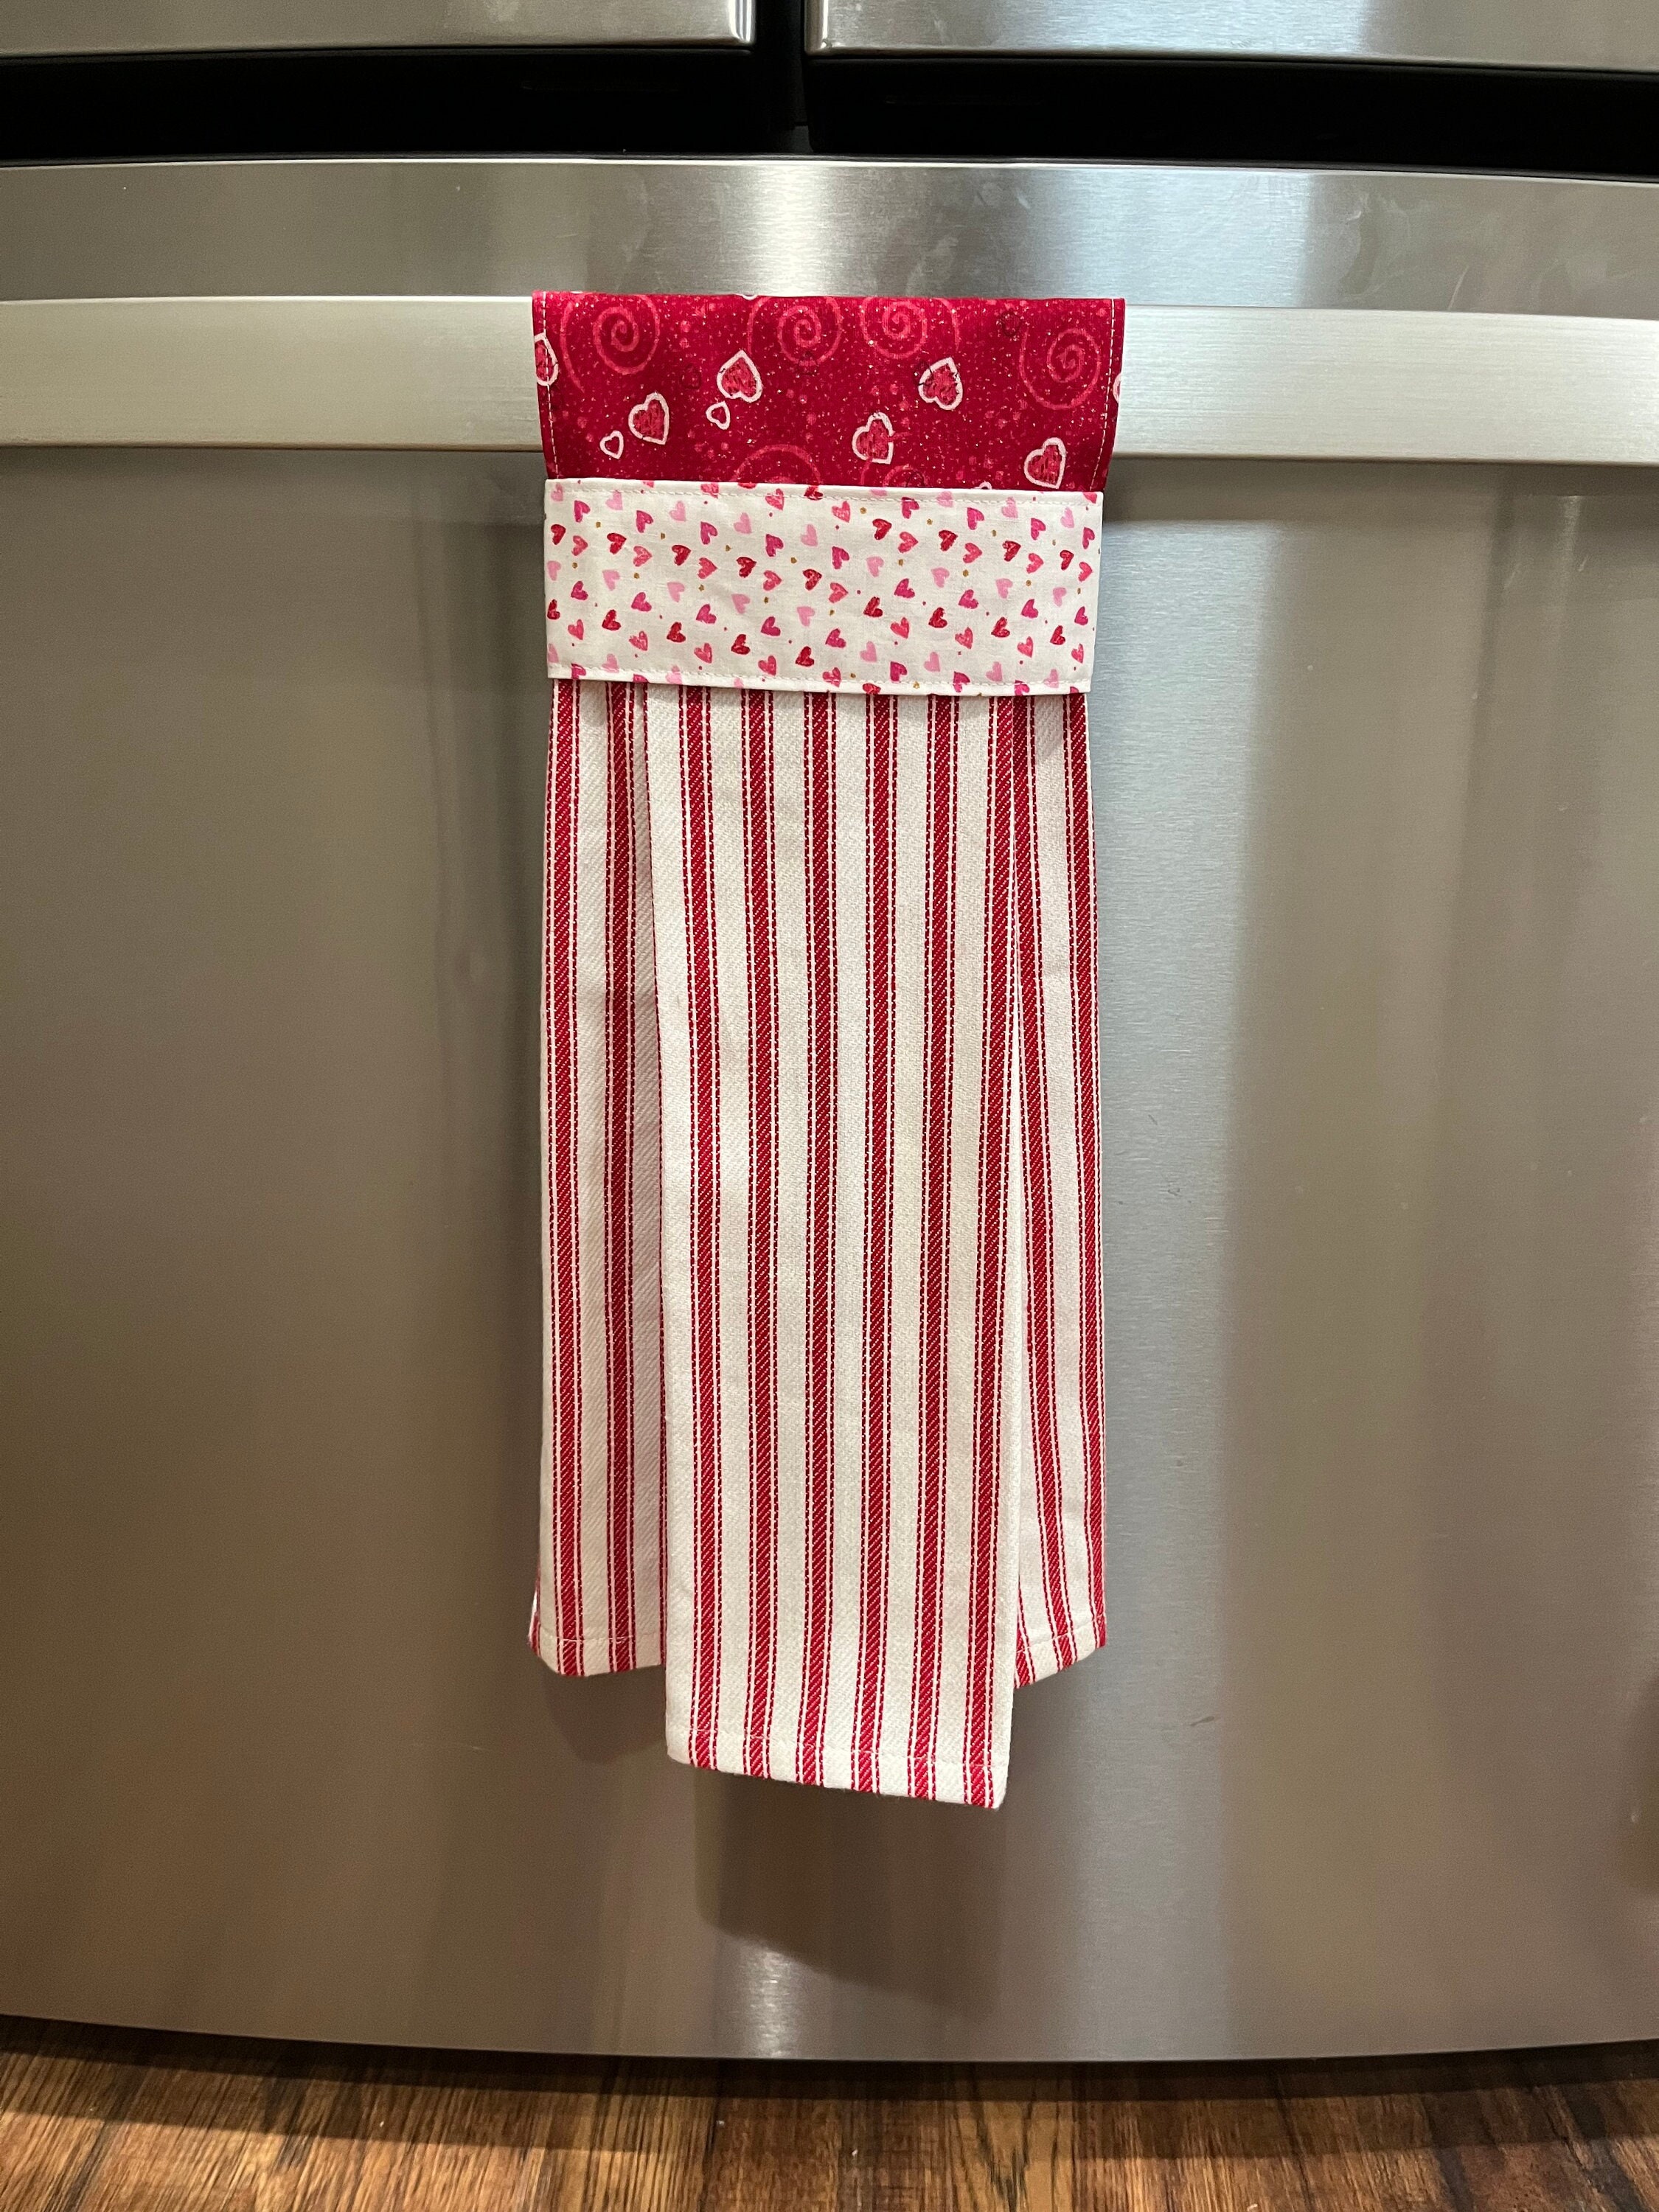 Red Roses Hanging Kitchen Towel, Valentine Day Hand Towels With Hanging Loop,  Handmade Easy Hang and Stay Put Dish Towel With Snap Closure 